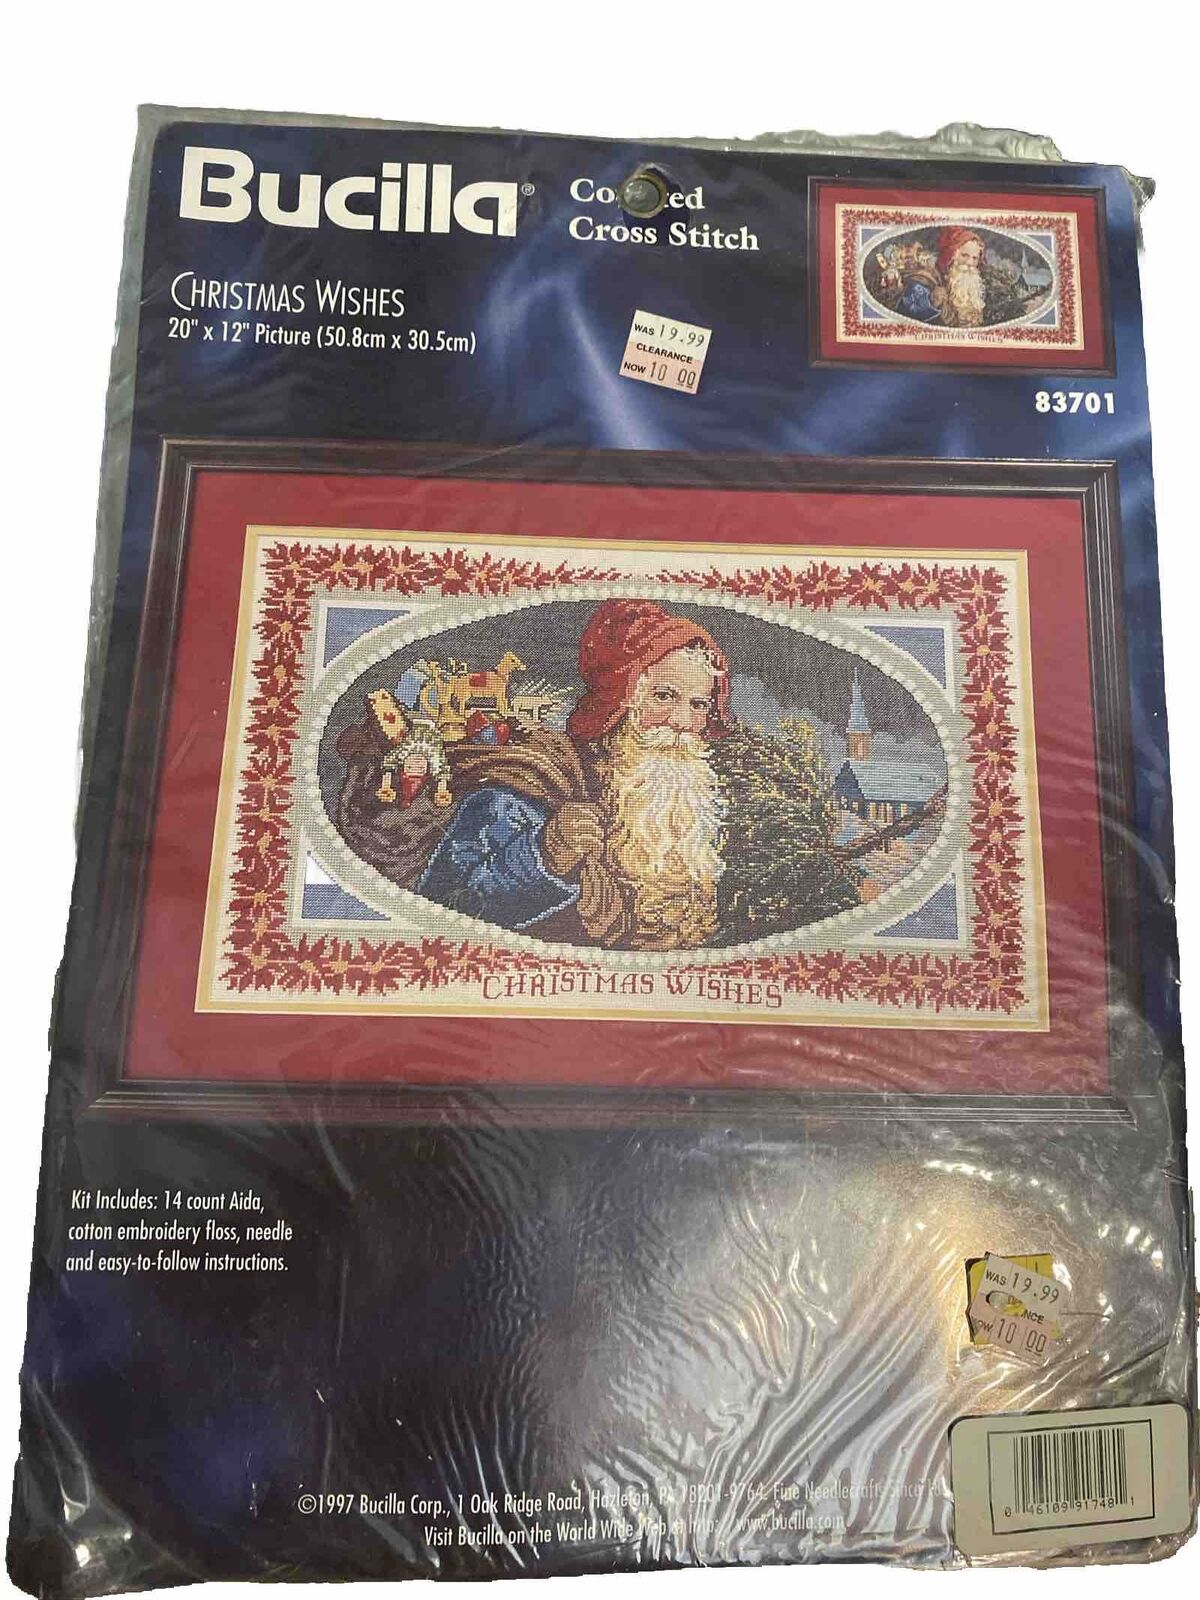 Bucilla CHRISTMAS WISHES Counted Cross Stitch 83701 Sealed 1997